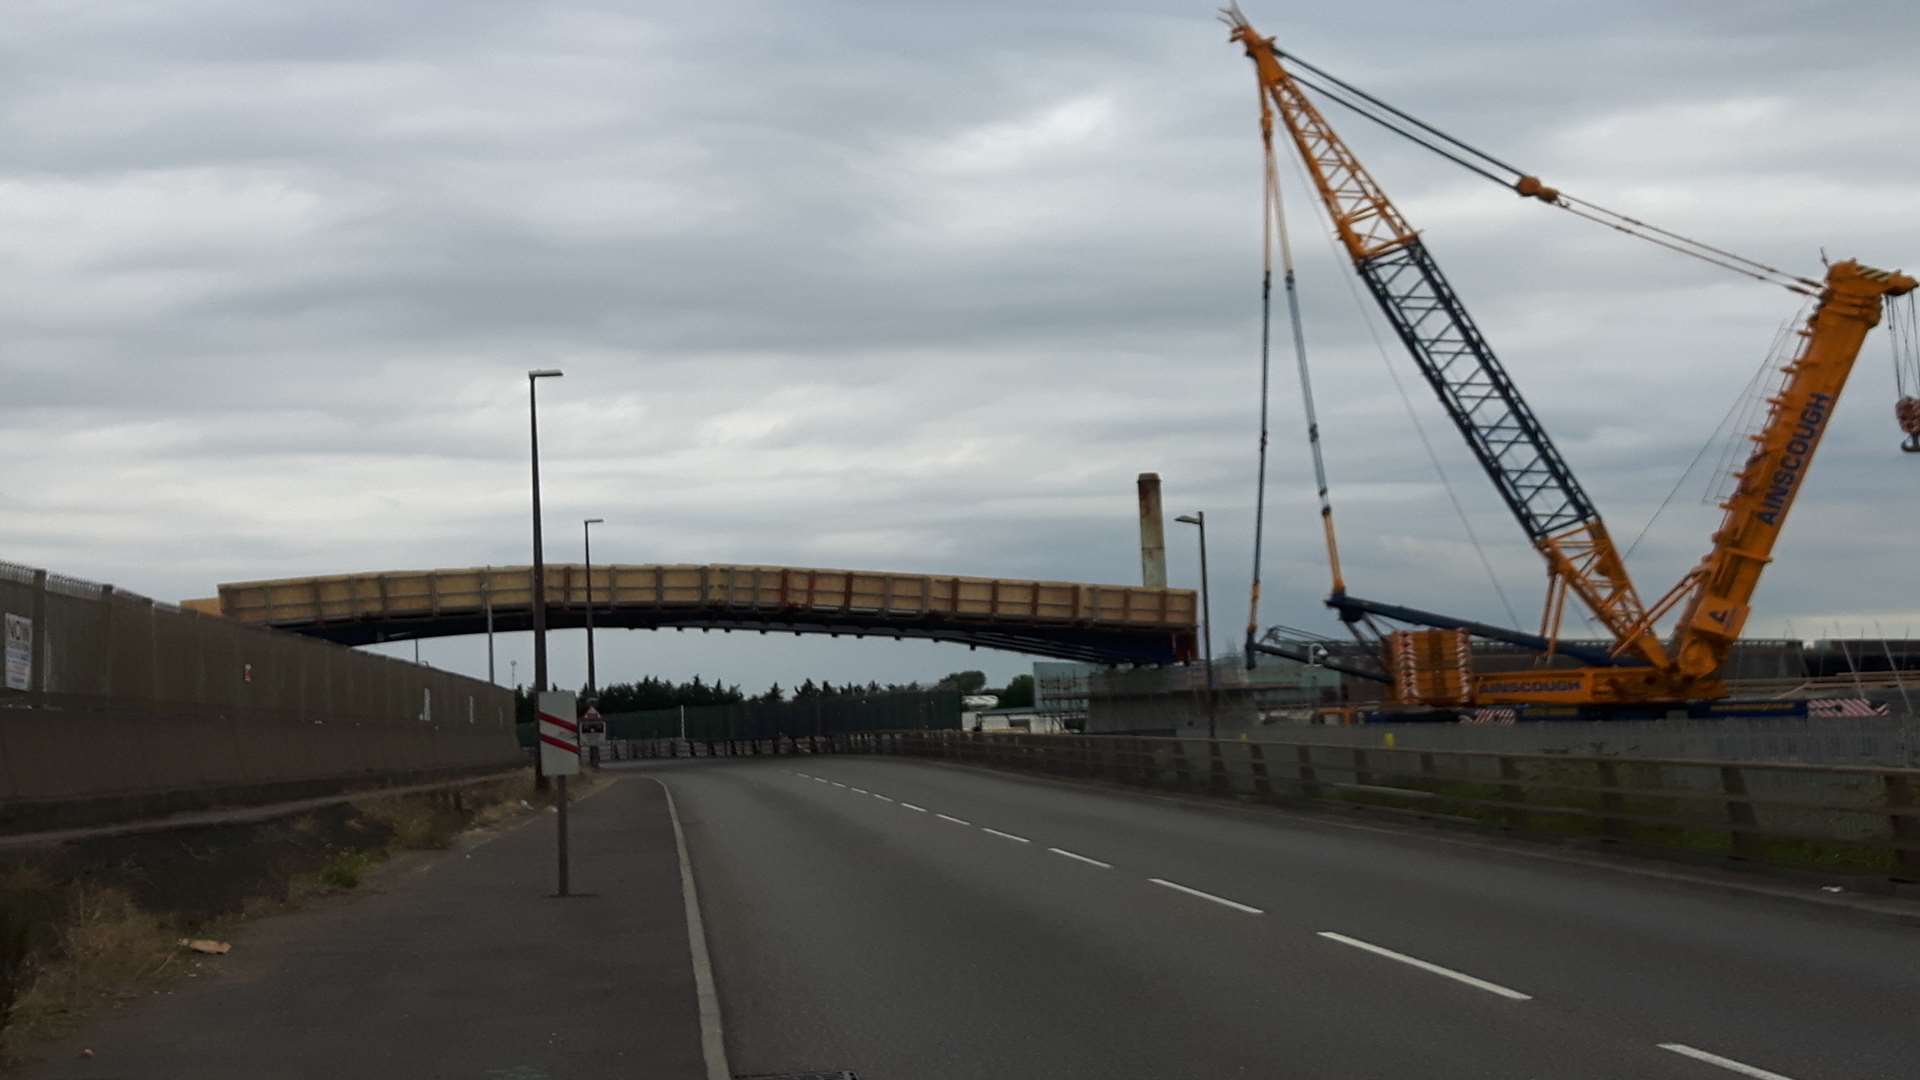 The new Wildfire Bridge across the Brielle Way almost completed